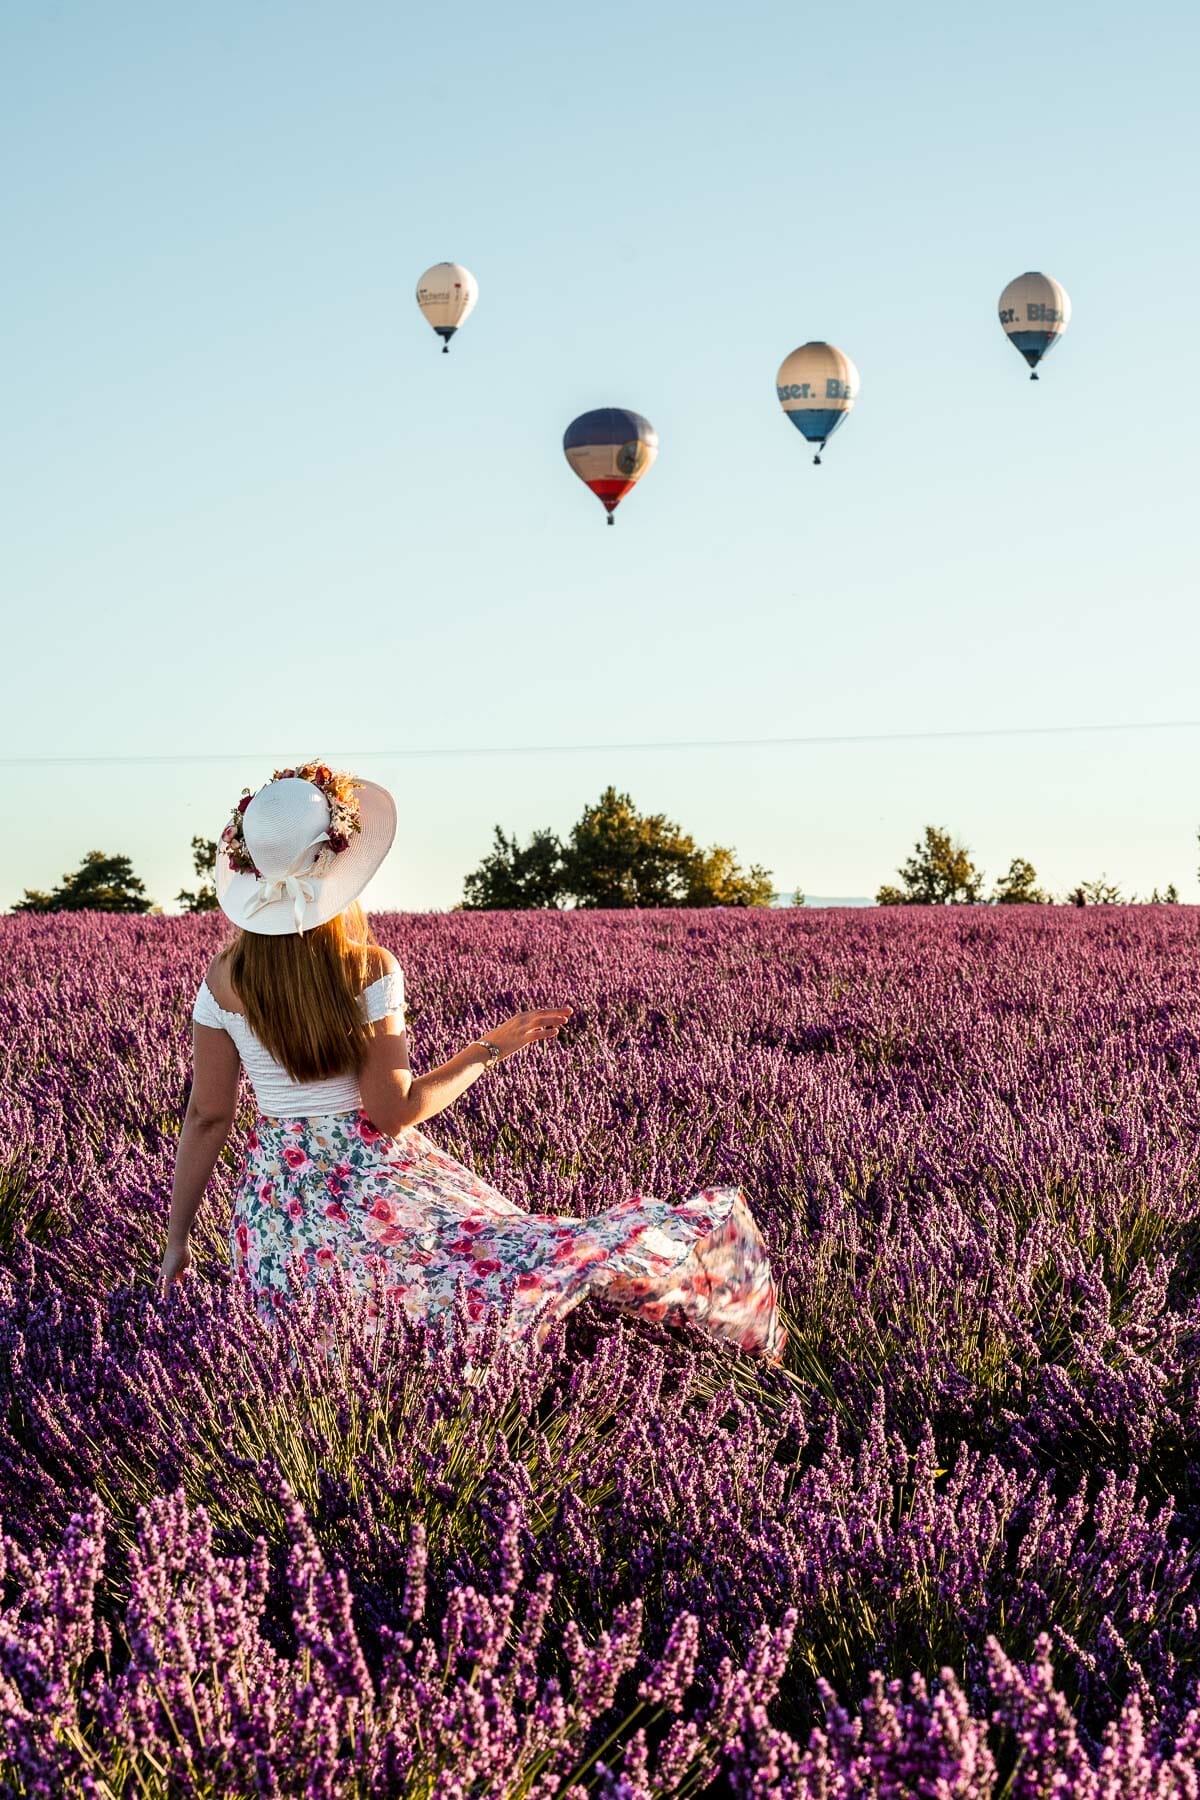 Hot air balloons at the lavender fields in Provence, France